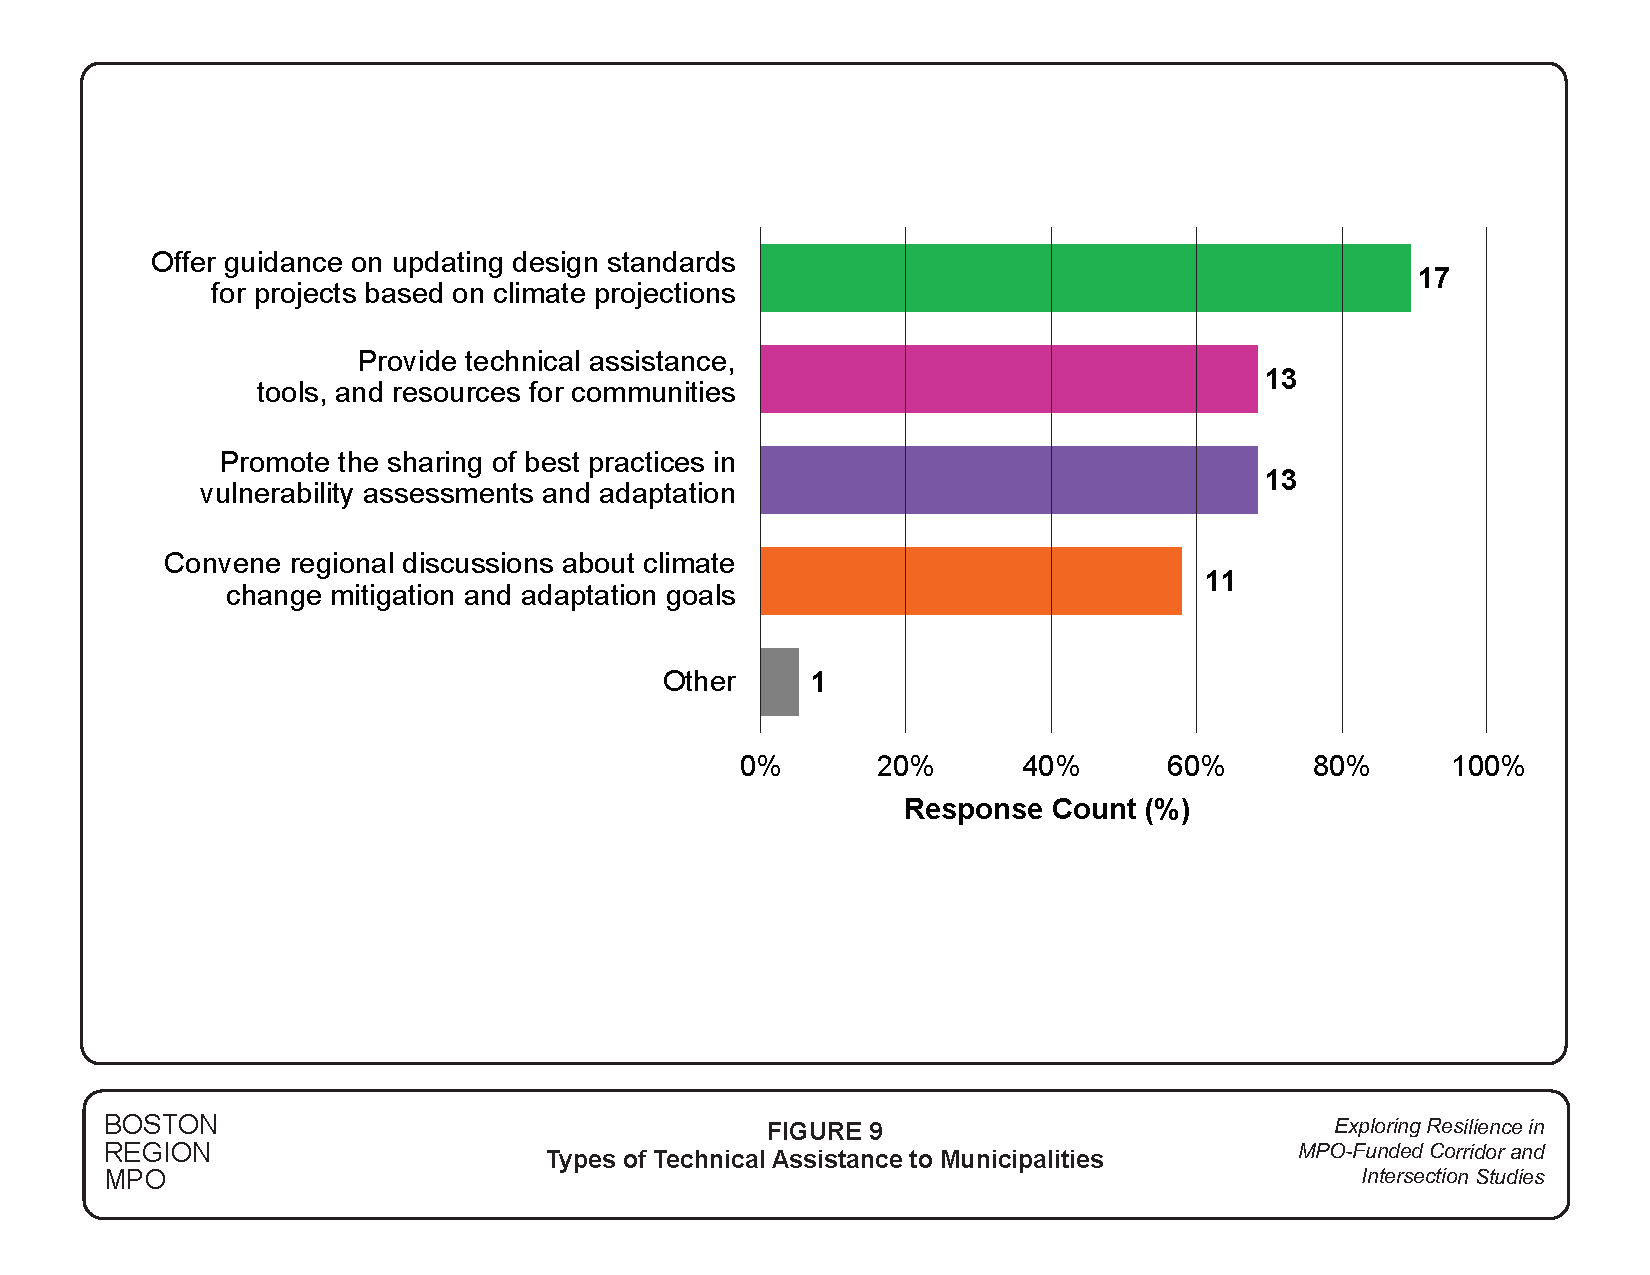 Figure 9 is a graph showing the survey results about the kinds of technical assistance that municipalities need to understand the hazards and vulnerabilities of the transportation system.